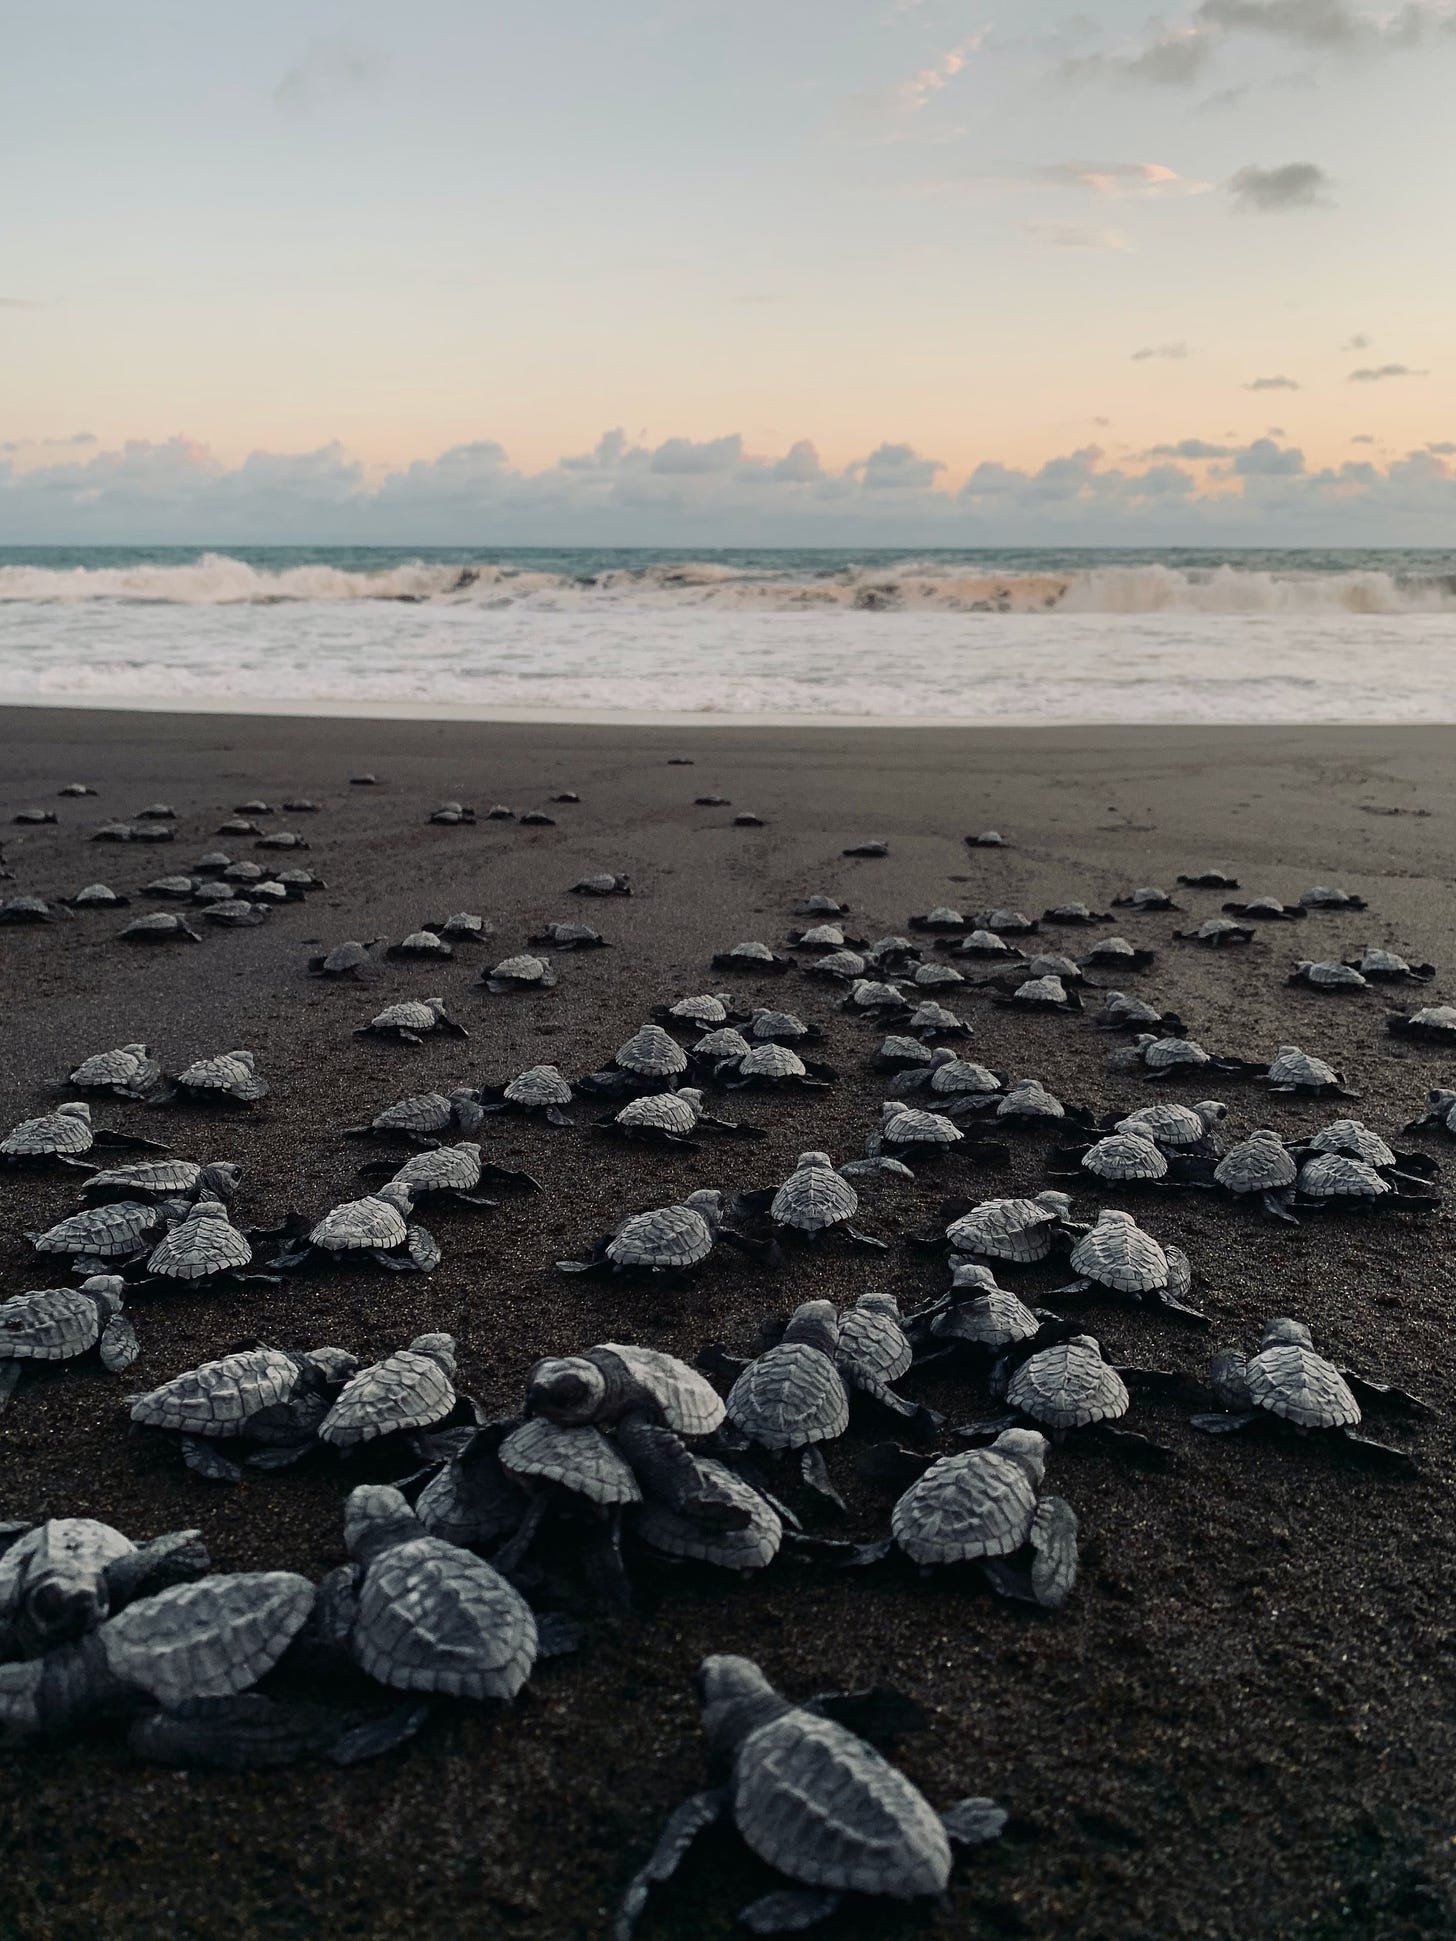 Dozens of baby turtles marching to the ocean.